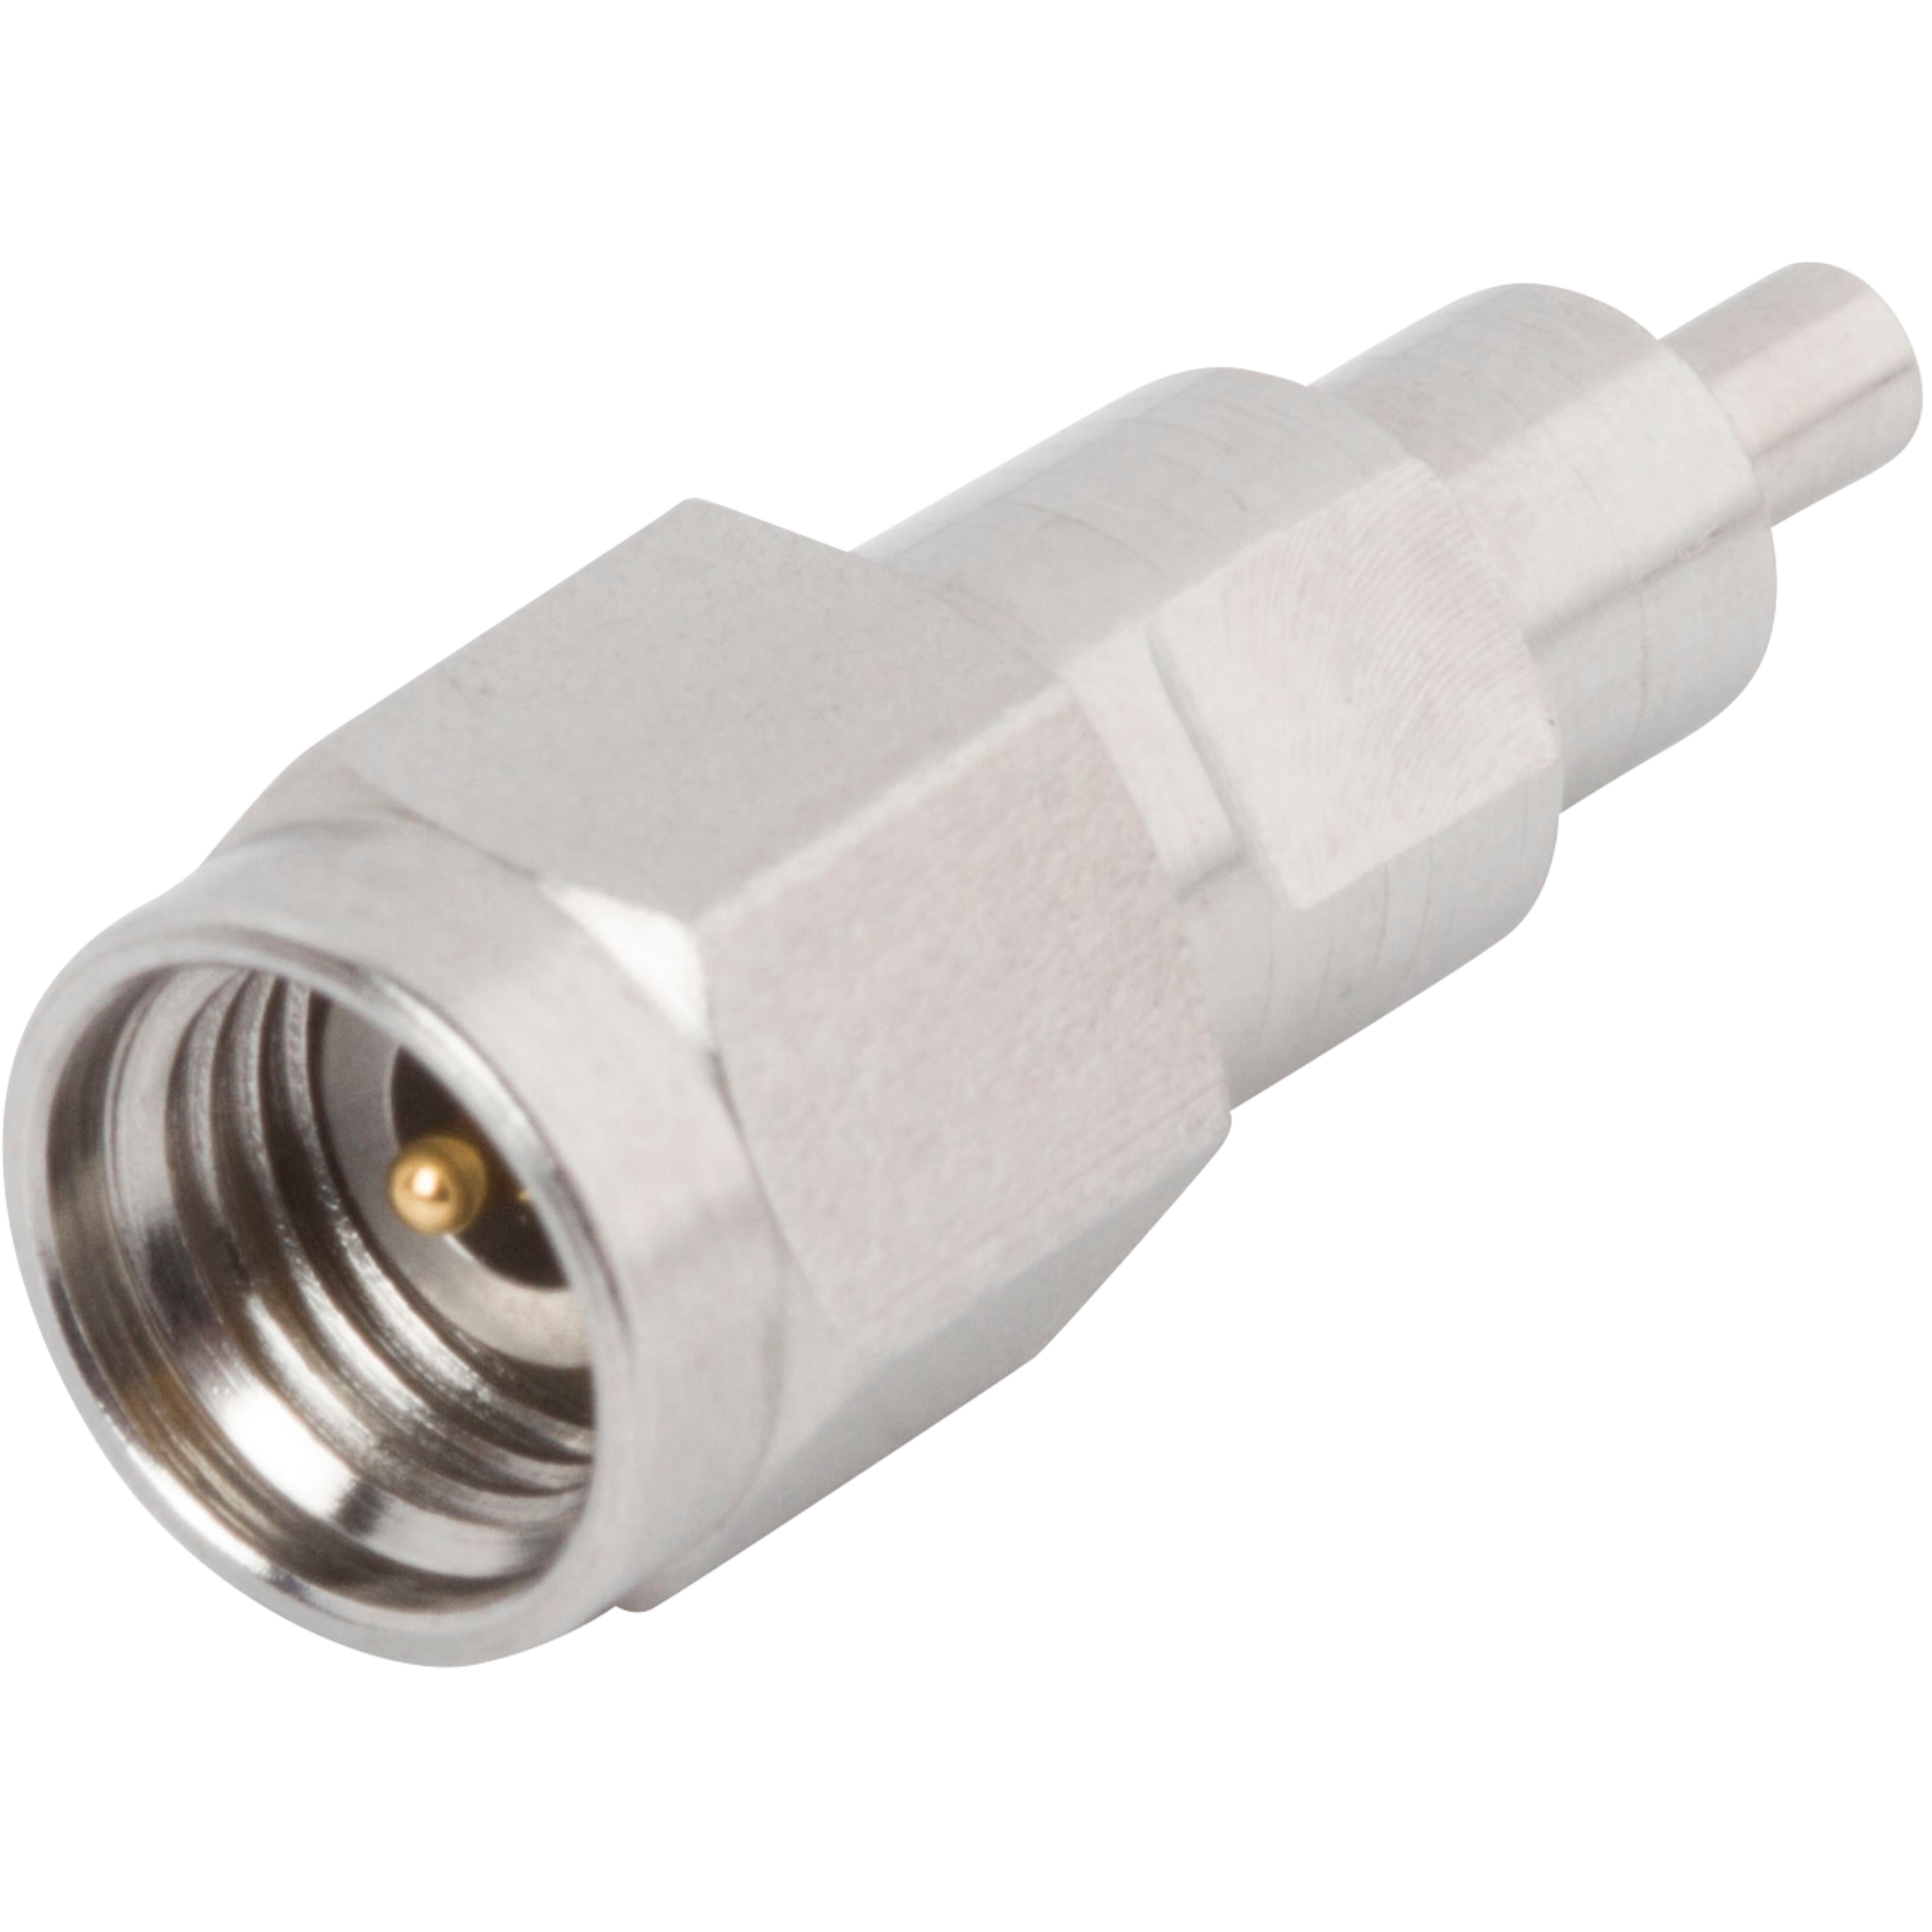 2.92mm Male to SMPS Male Adapter, SB, SF1115-6090